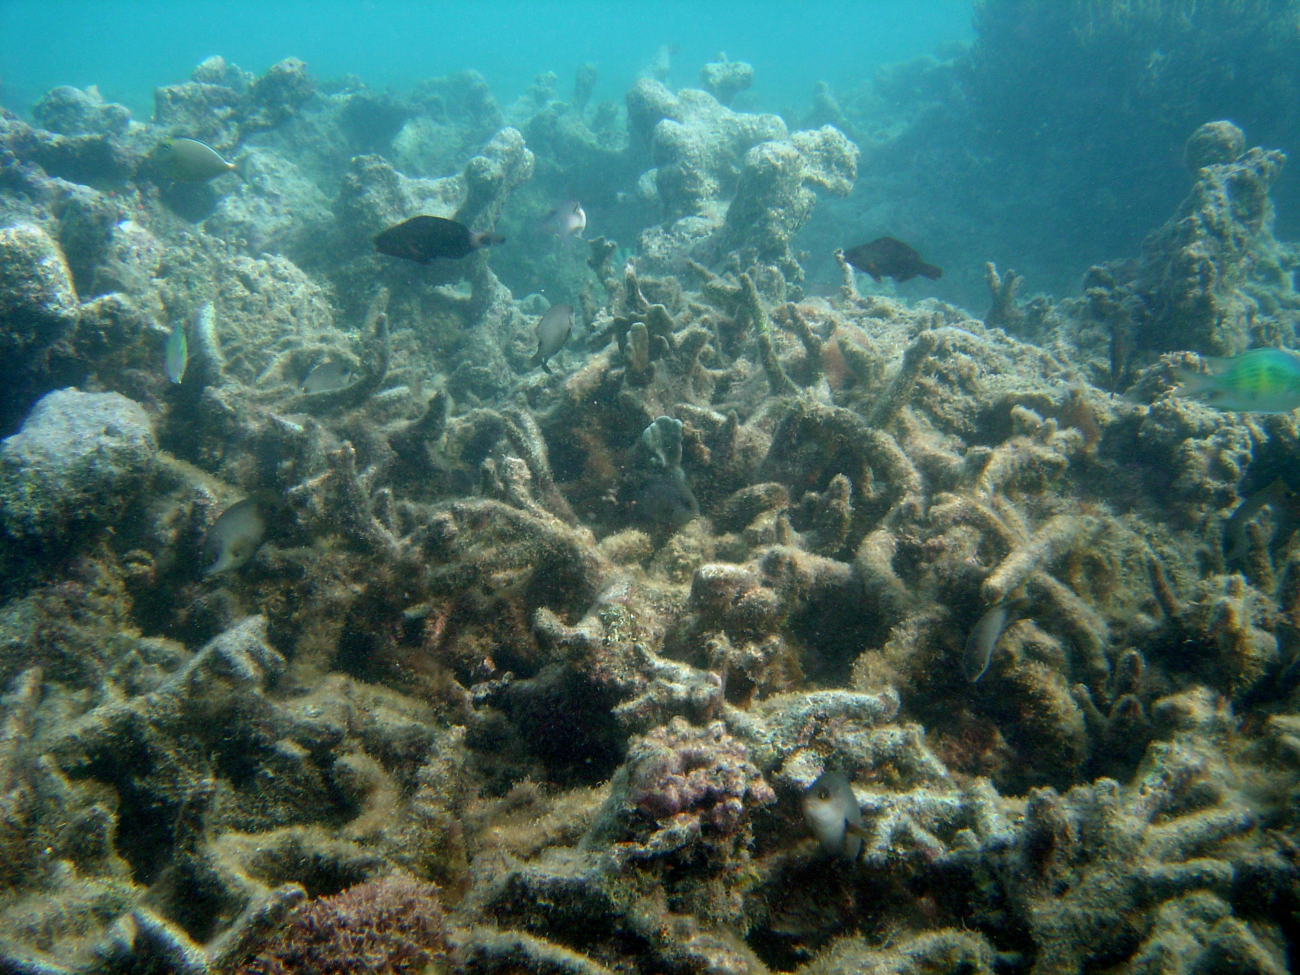 Various fish wander through the skeletal remains of a once-vibrant reef